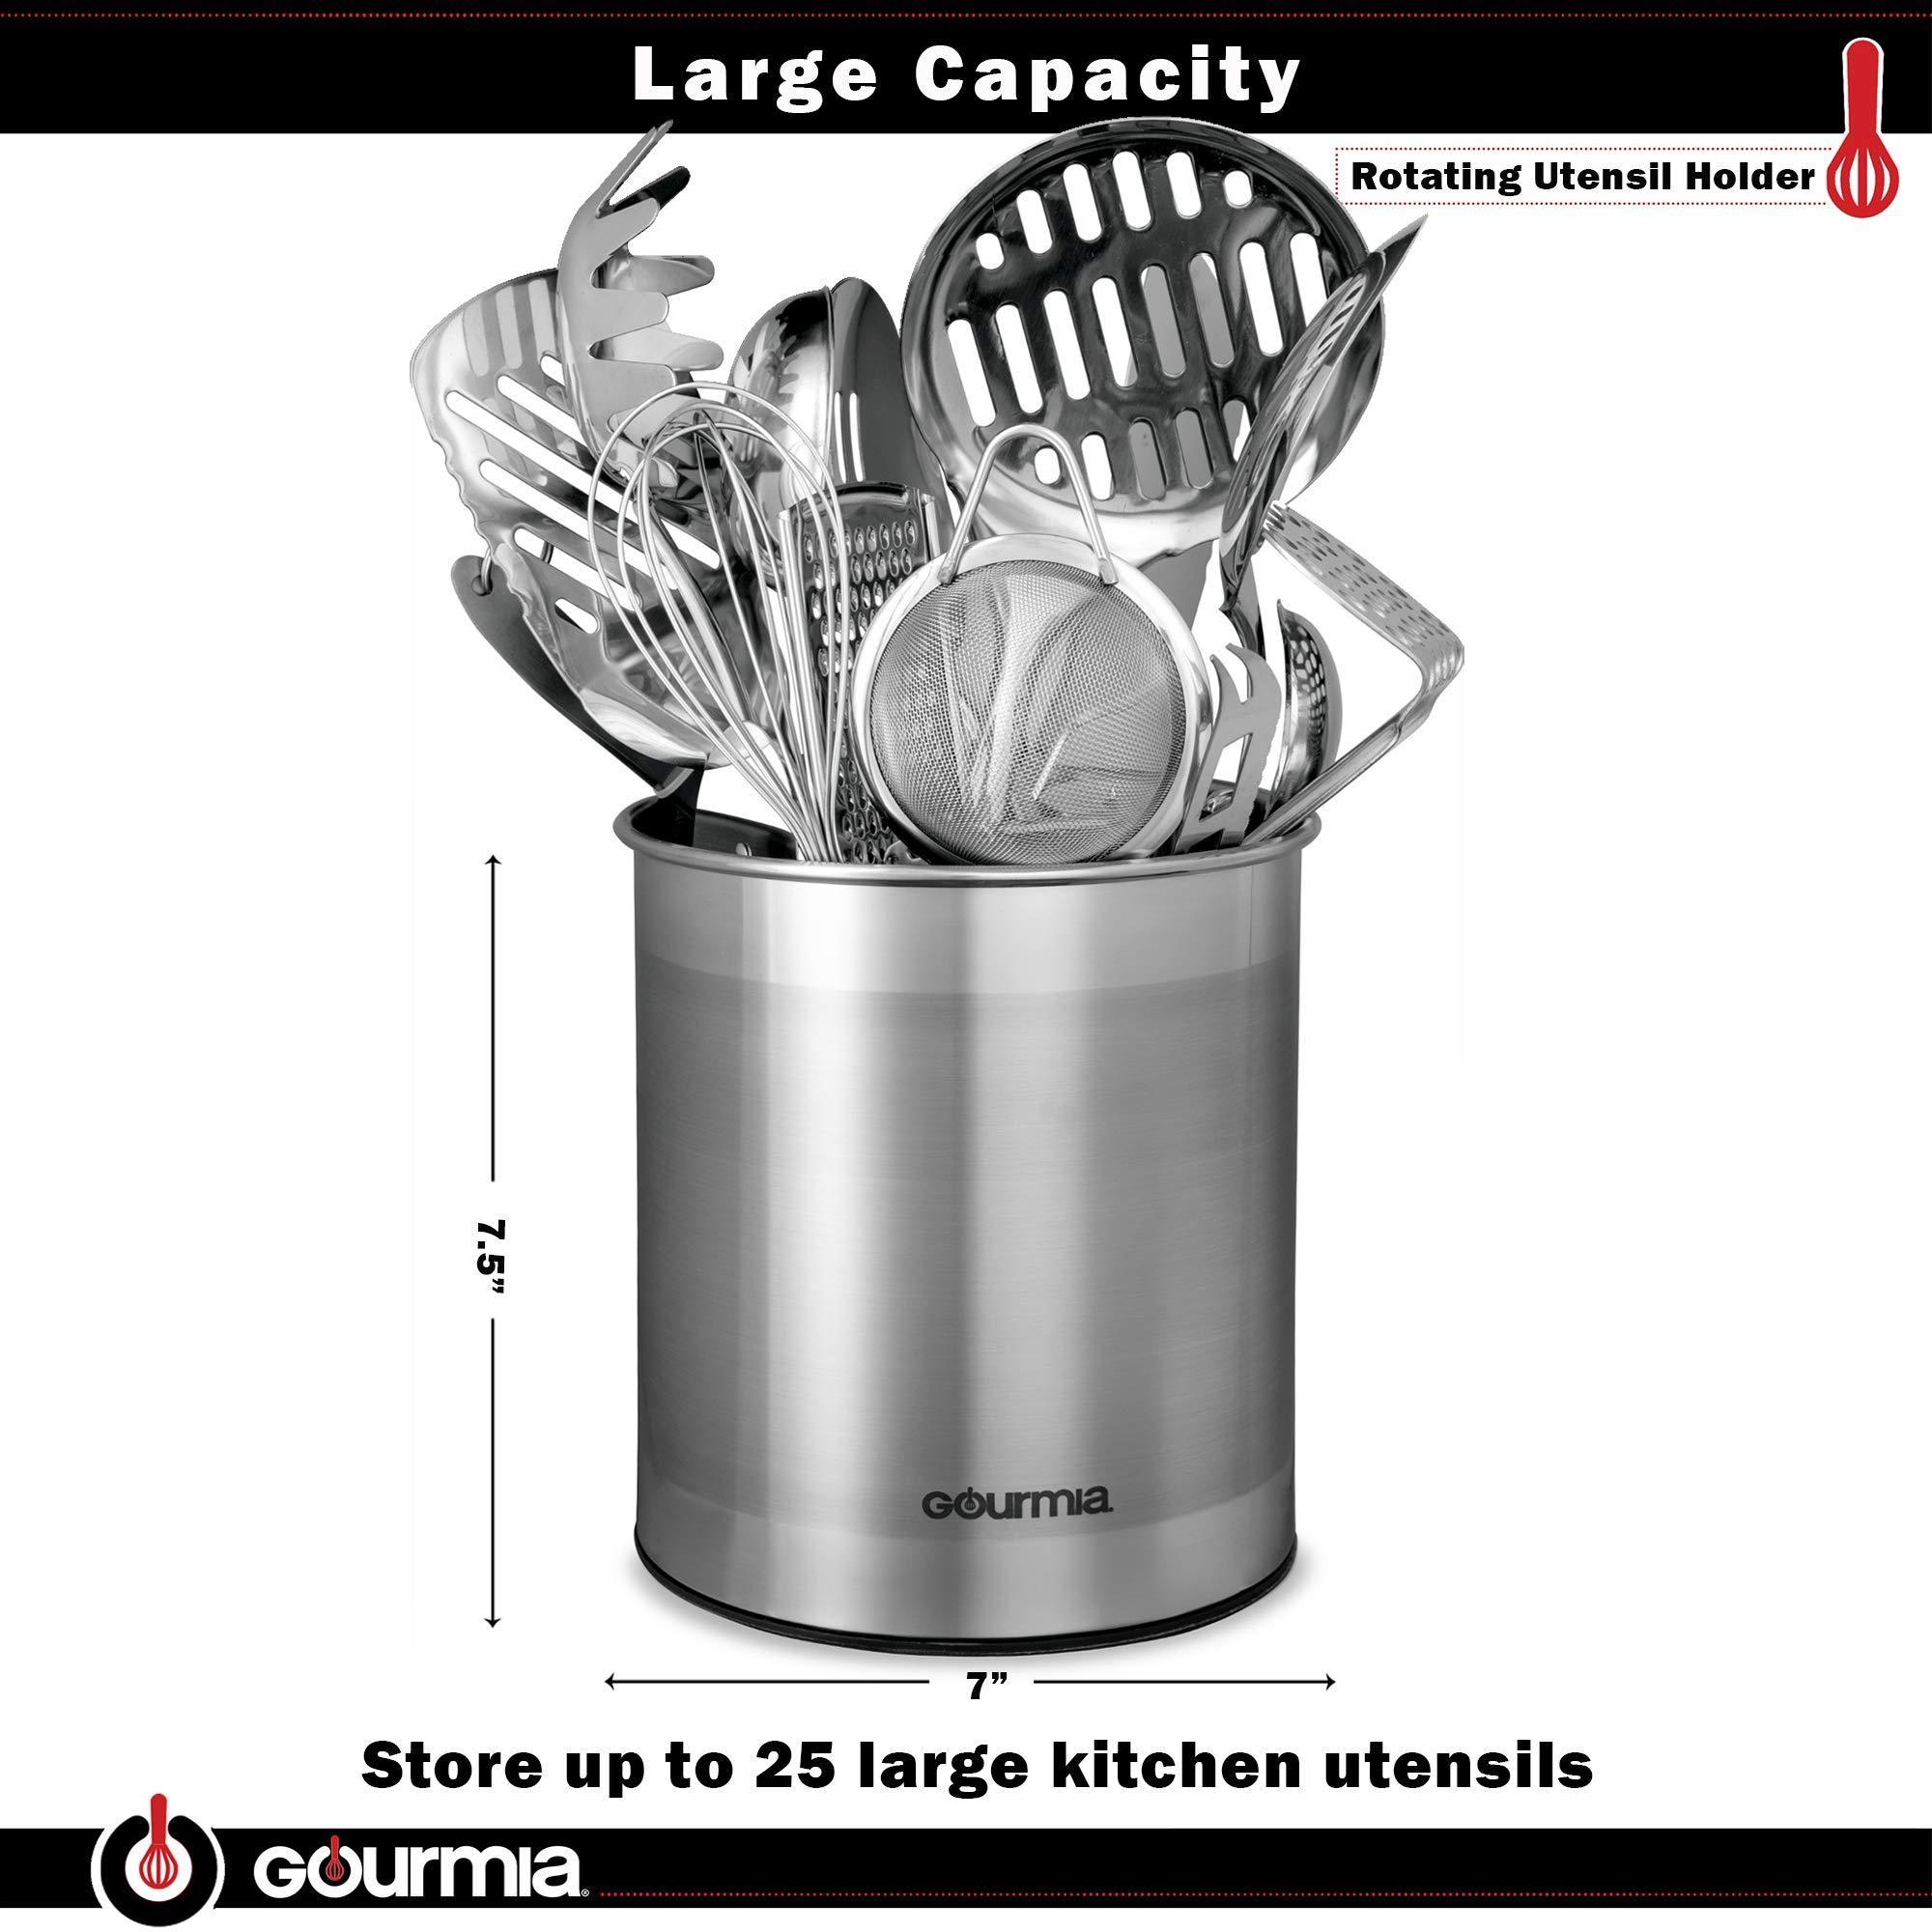 Best gourmia gch9345 rotating kitchen utensil holder spinning stainless steel organizer to store cooking and serving tools dishwasher safe non slip bottom use as caddy